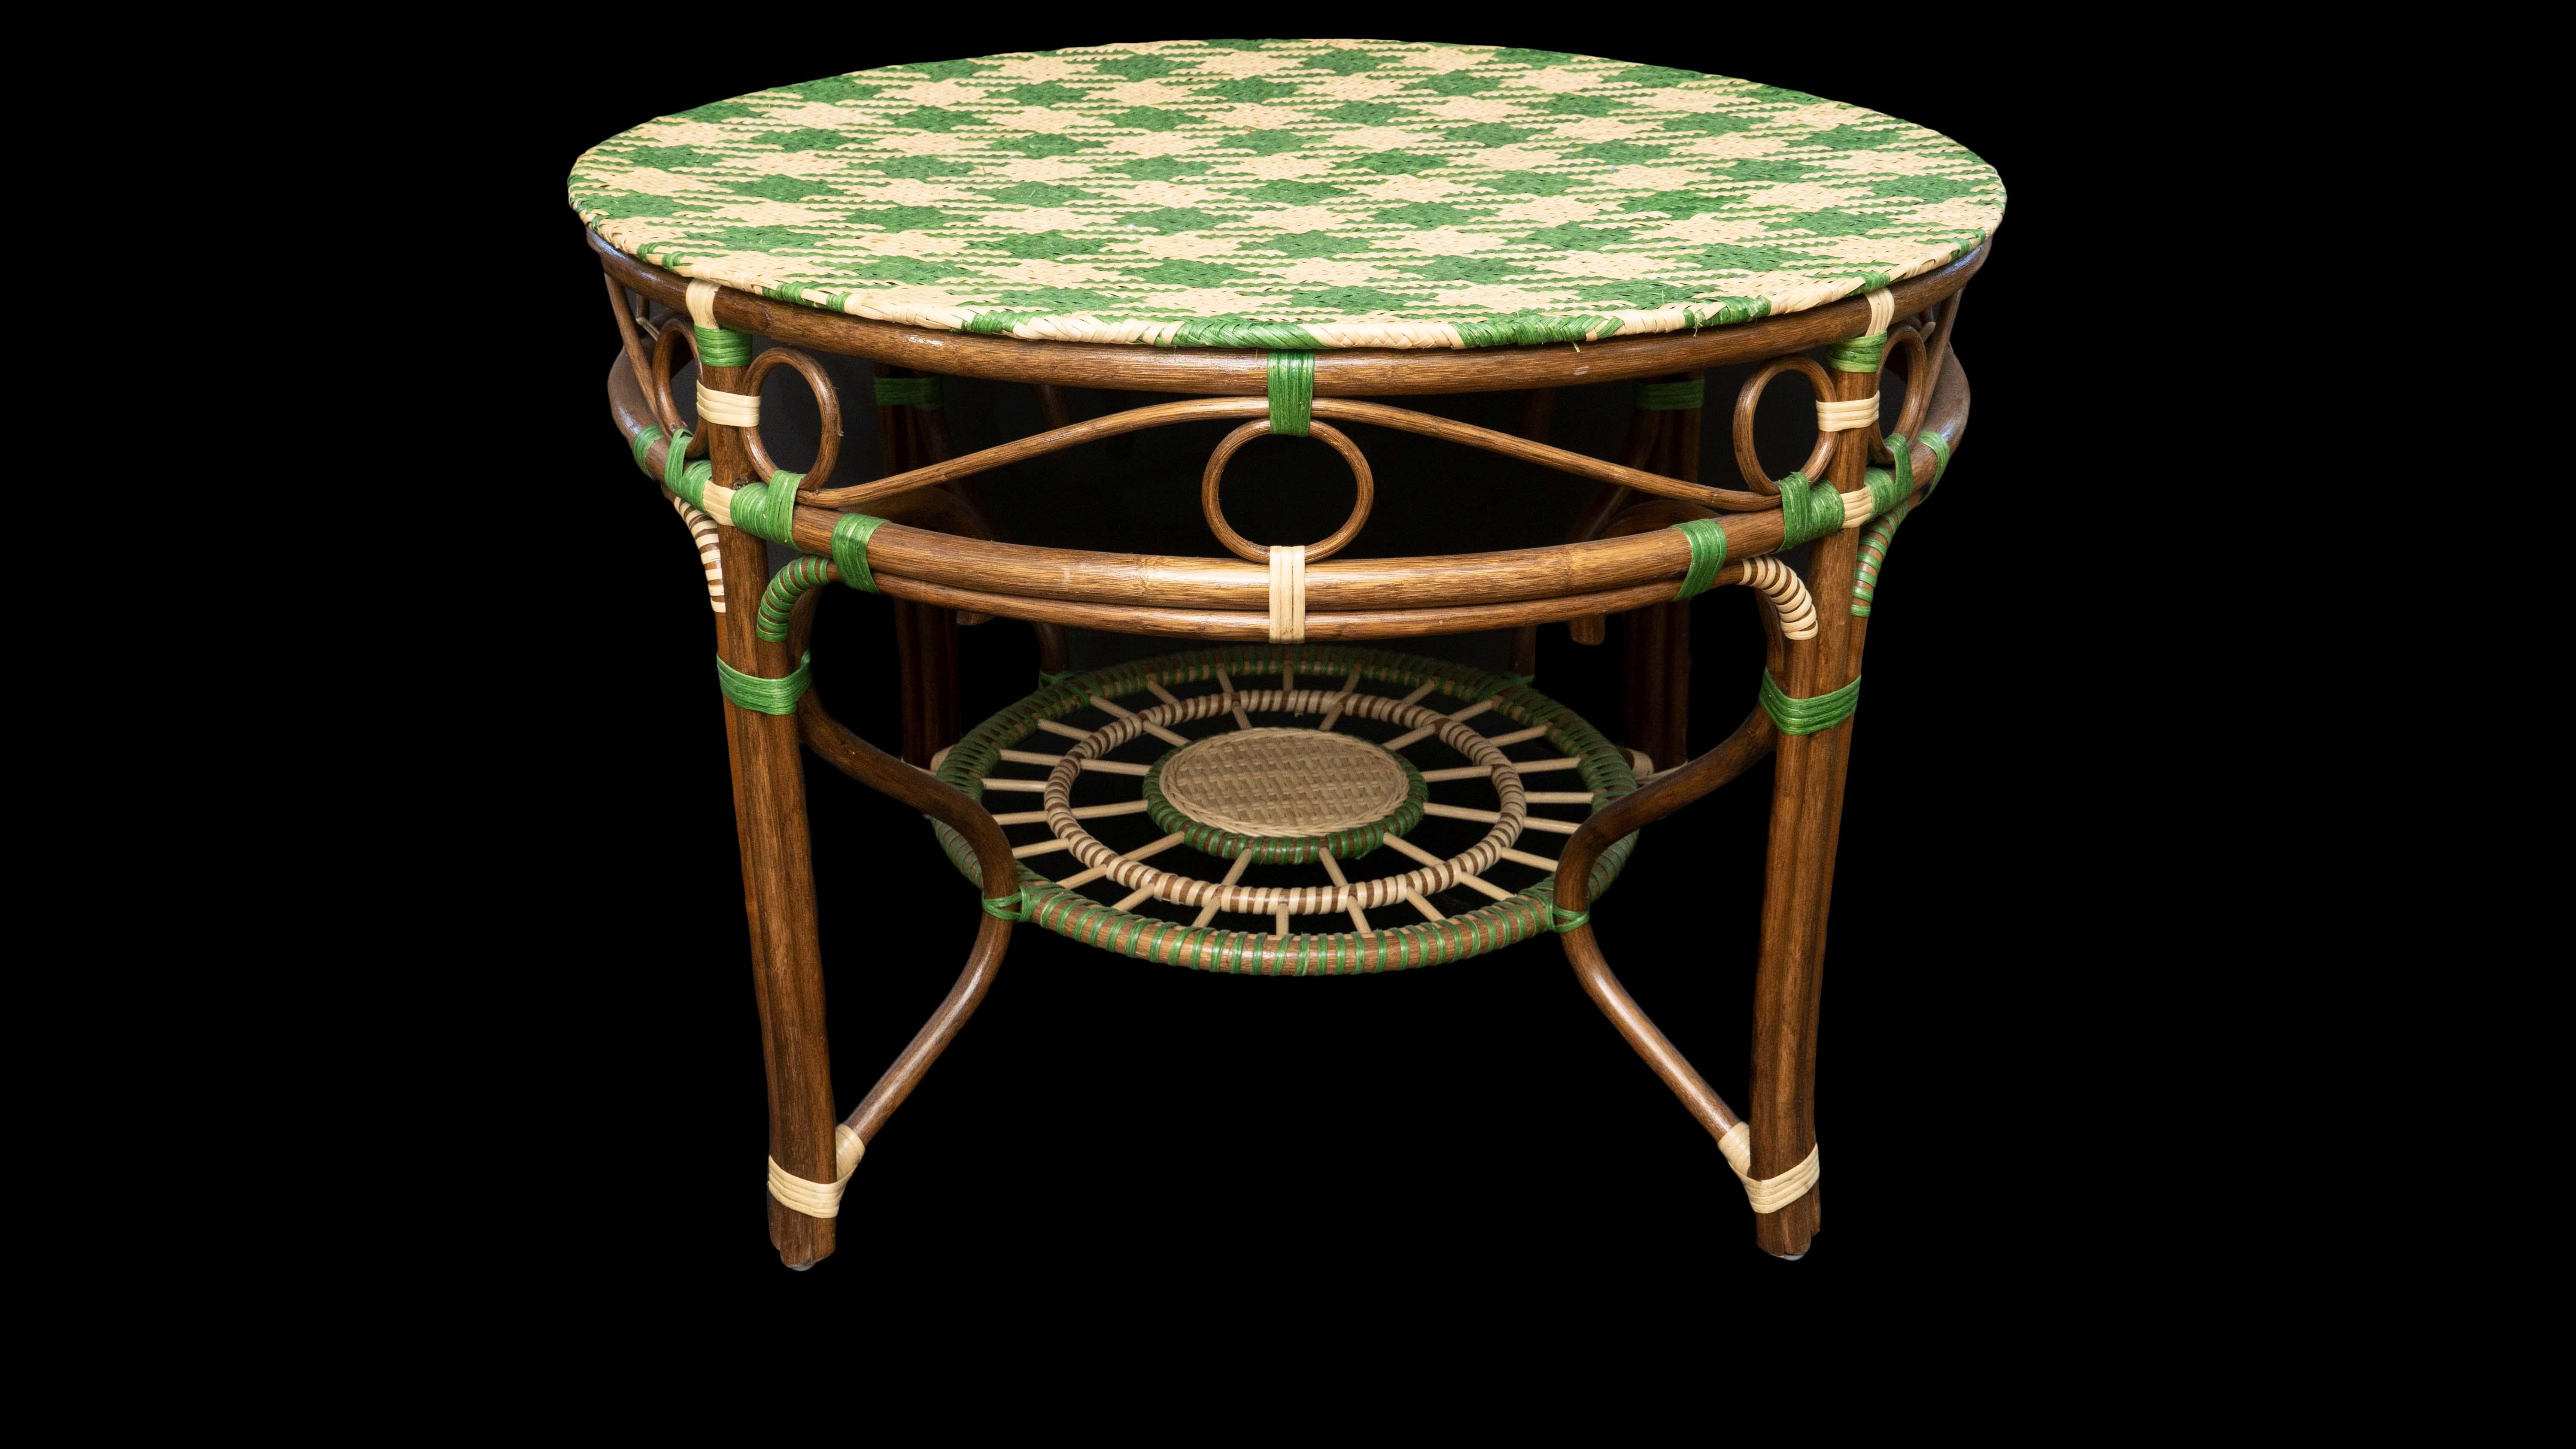 Creel and Gow green and cream rattan (wicker) center table with hounds tooth top design. Made exclusively for Creel and Gow in Tangier, Morocco. 

Measures: 41